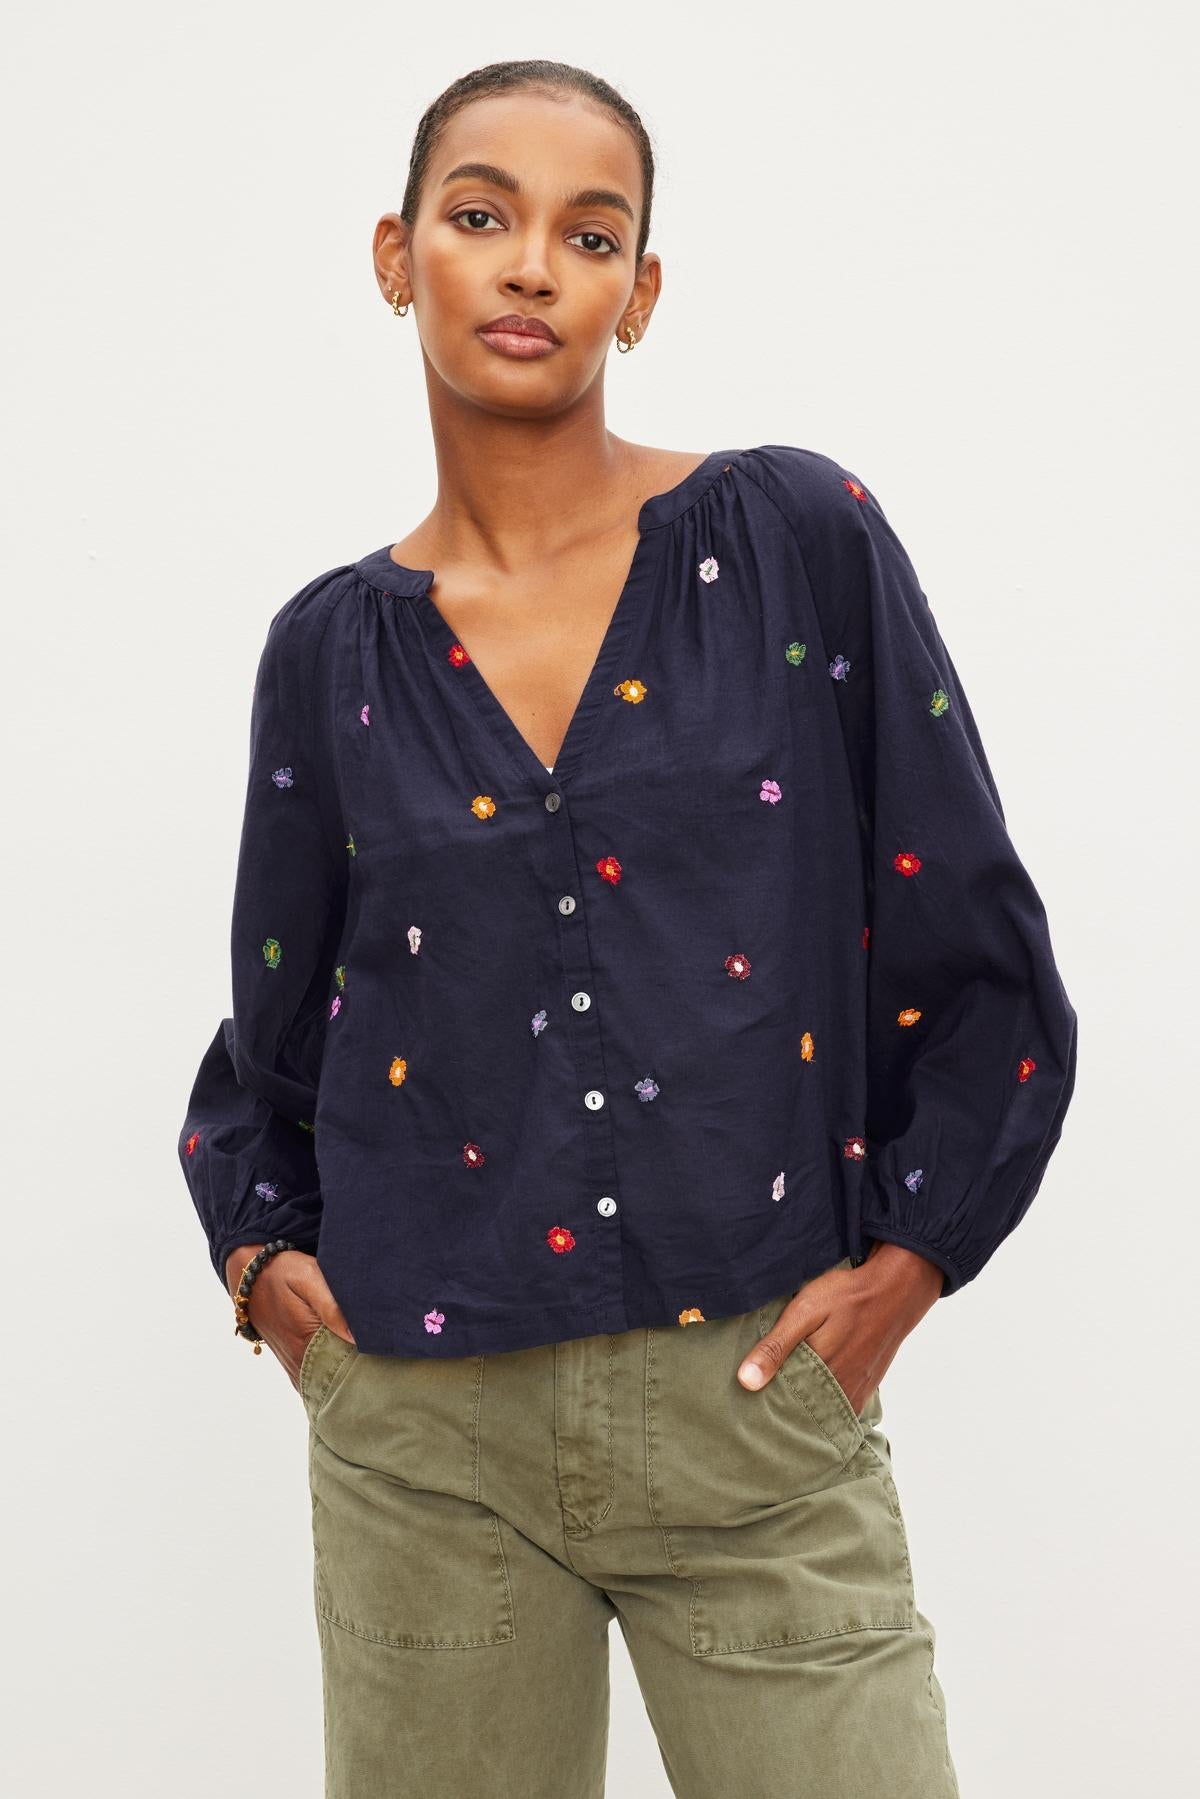 Velvet Aretha Embroidered Blouse - Navy Clothing - Tops - Shirts - Blouses - Blouses Top Price by Velvet | Grace the Boutique